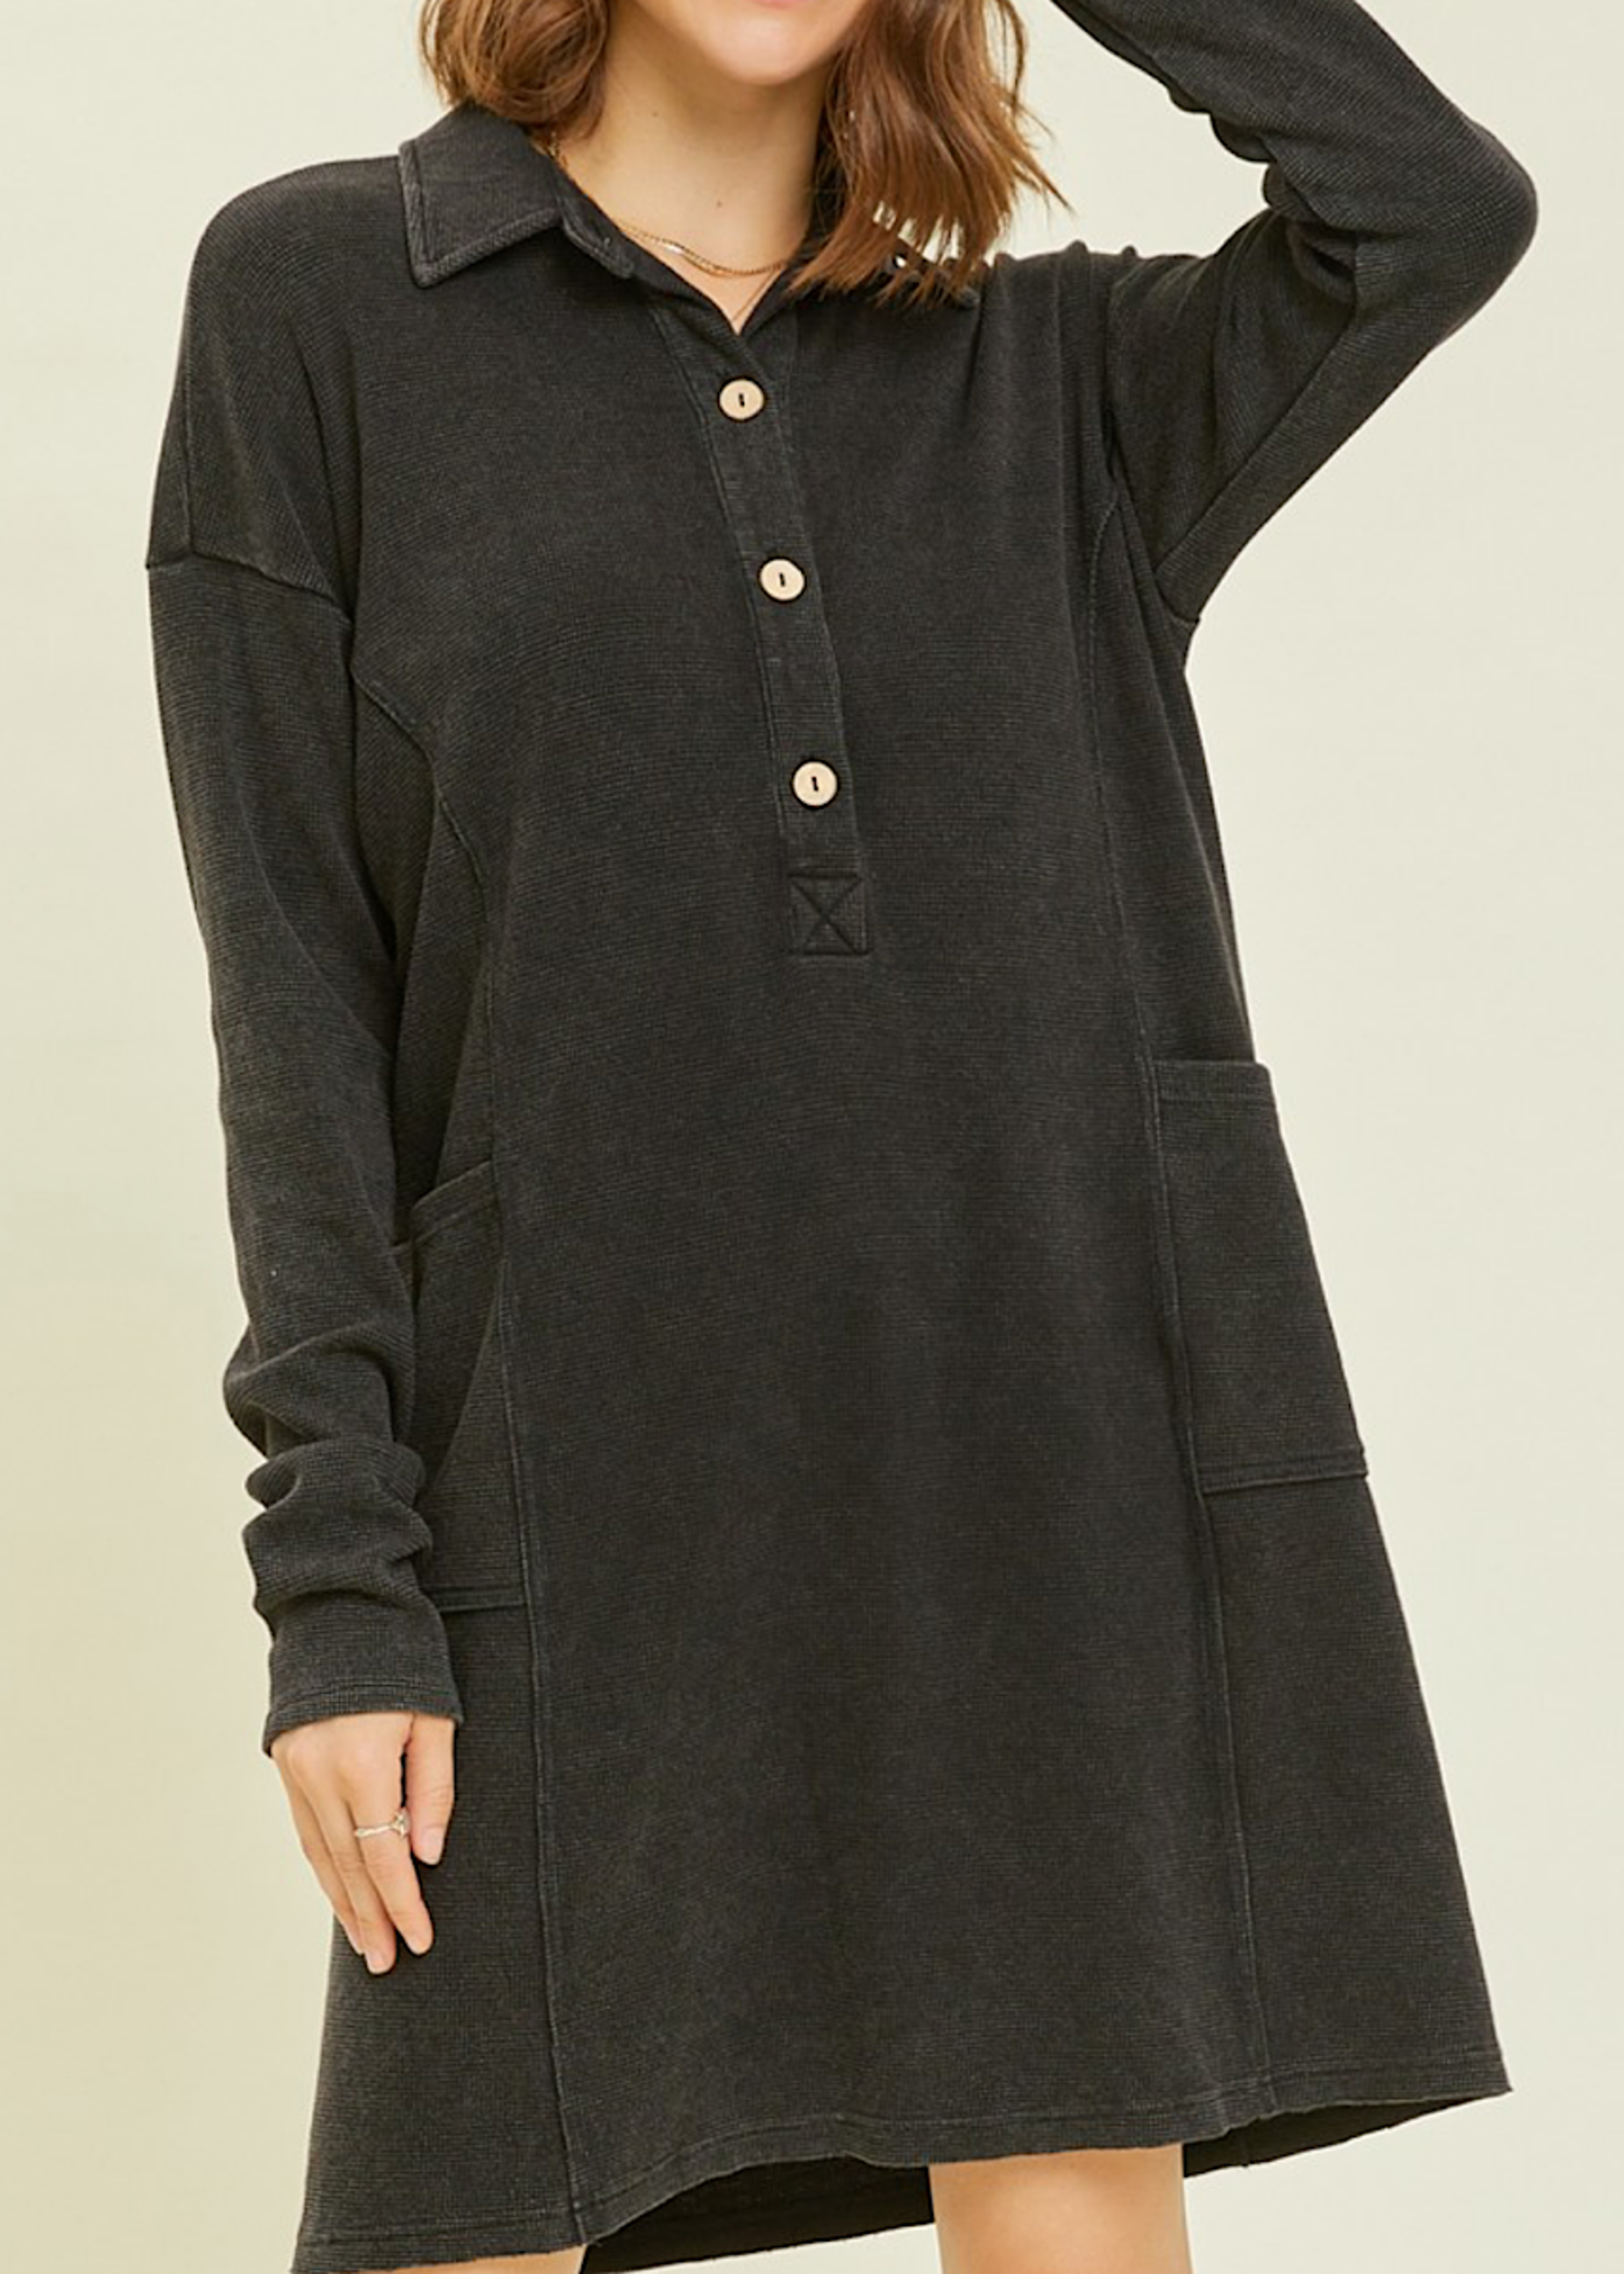 Black Mineral Washed Thermal Henley Dress with Pockets